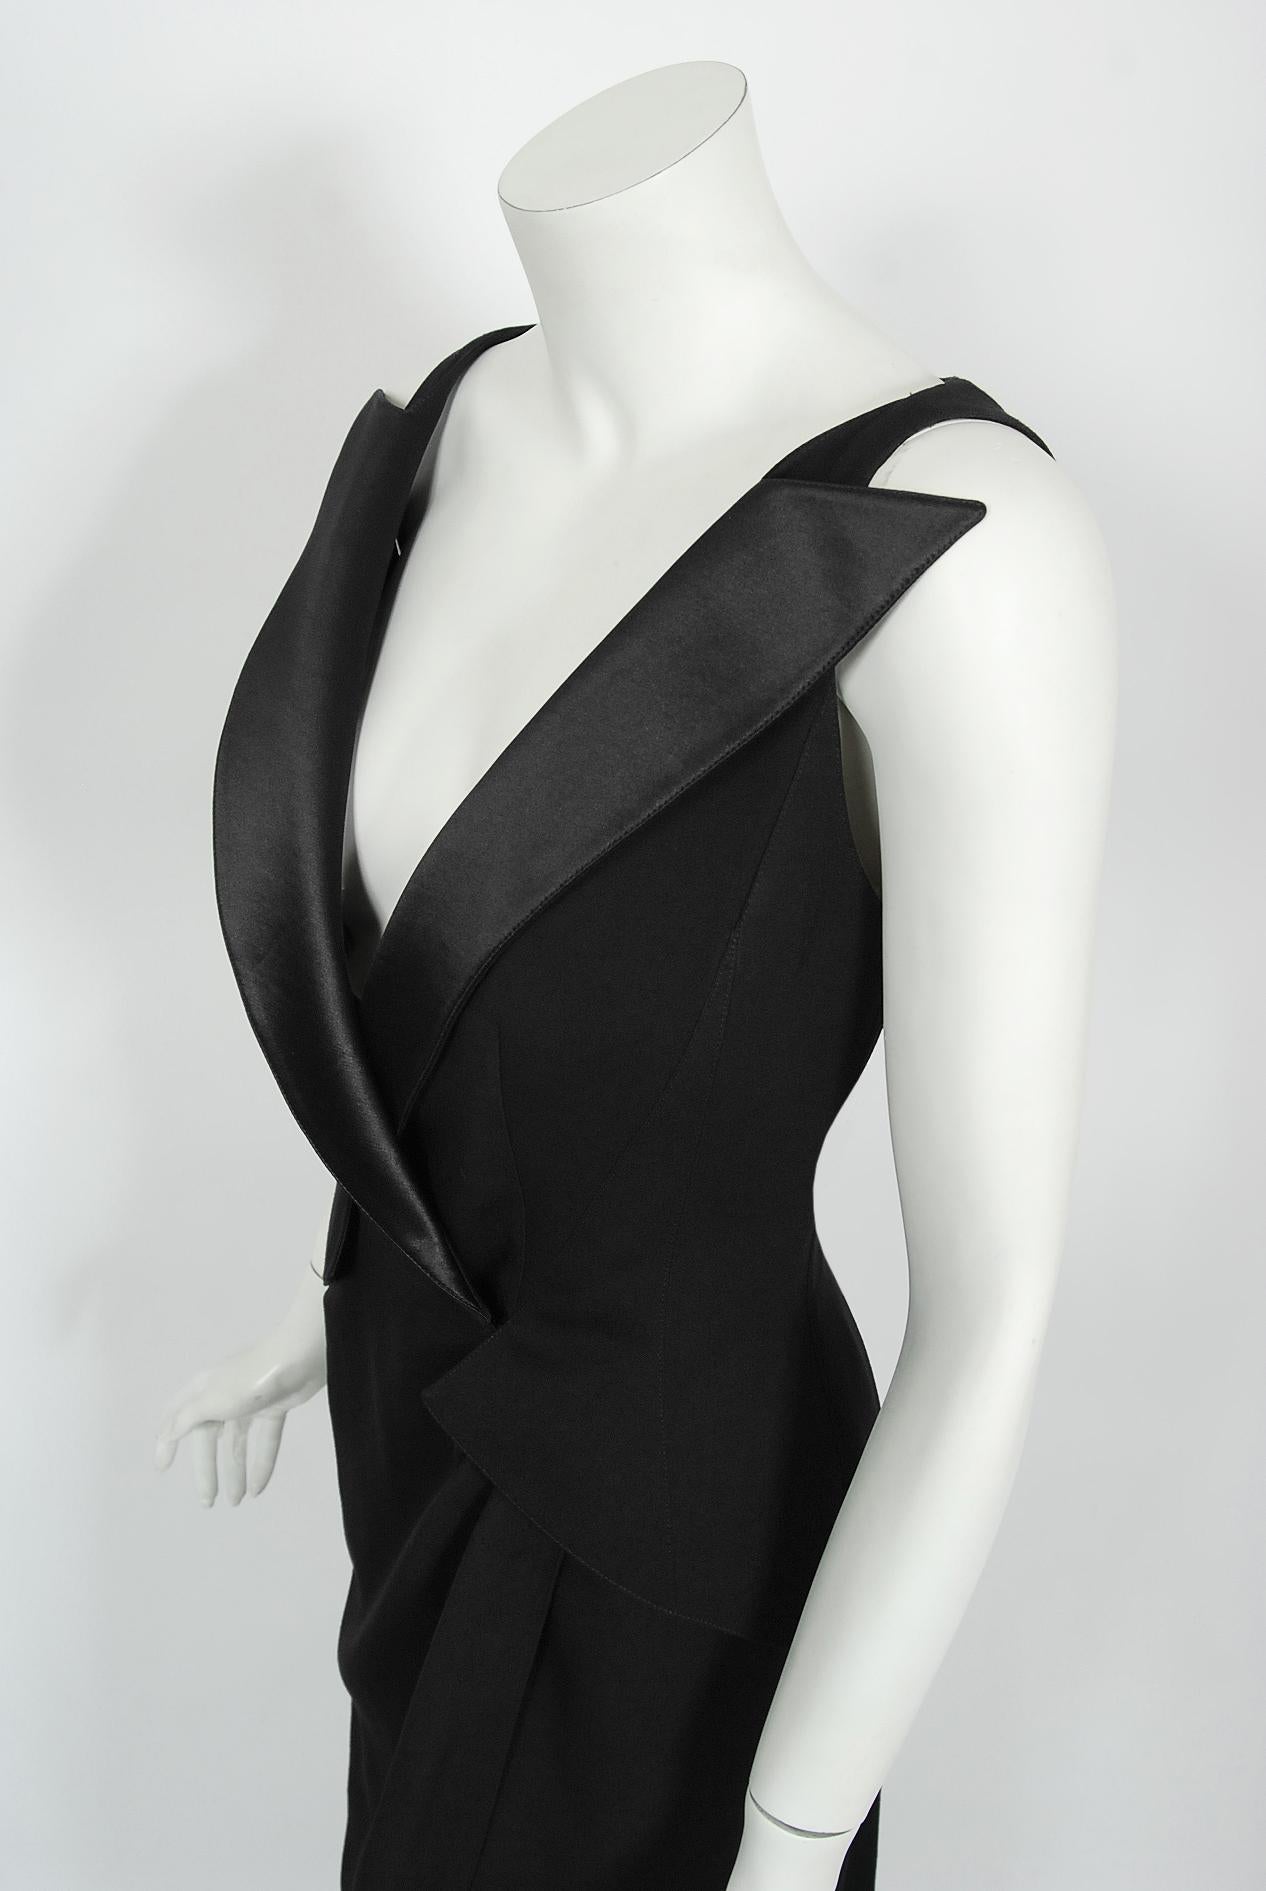 Vintage 1999 Thierry Mugler Couture Black Silk Bustier Low-Cut Hourglass Gown 6